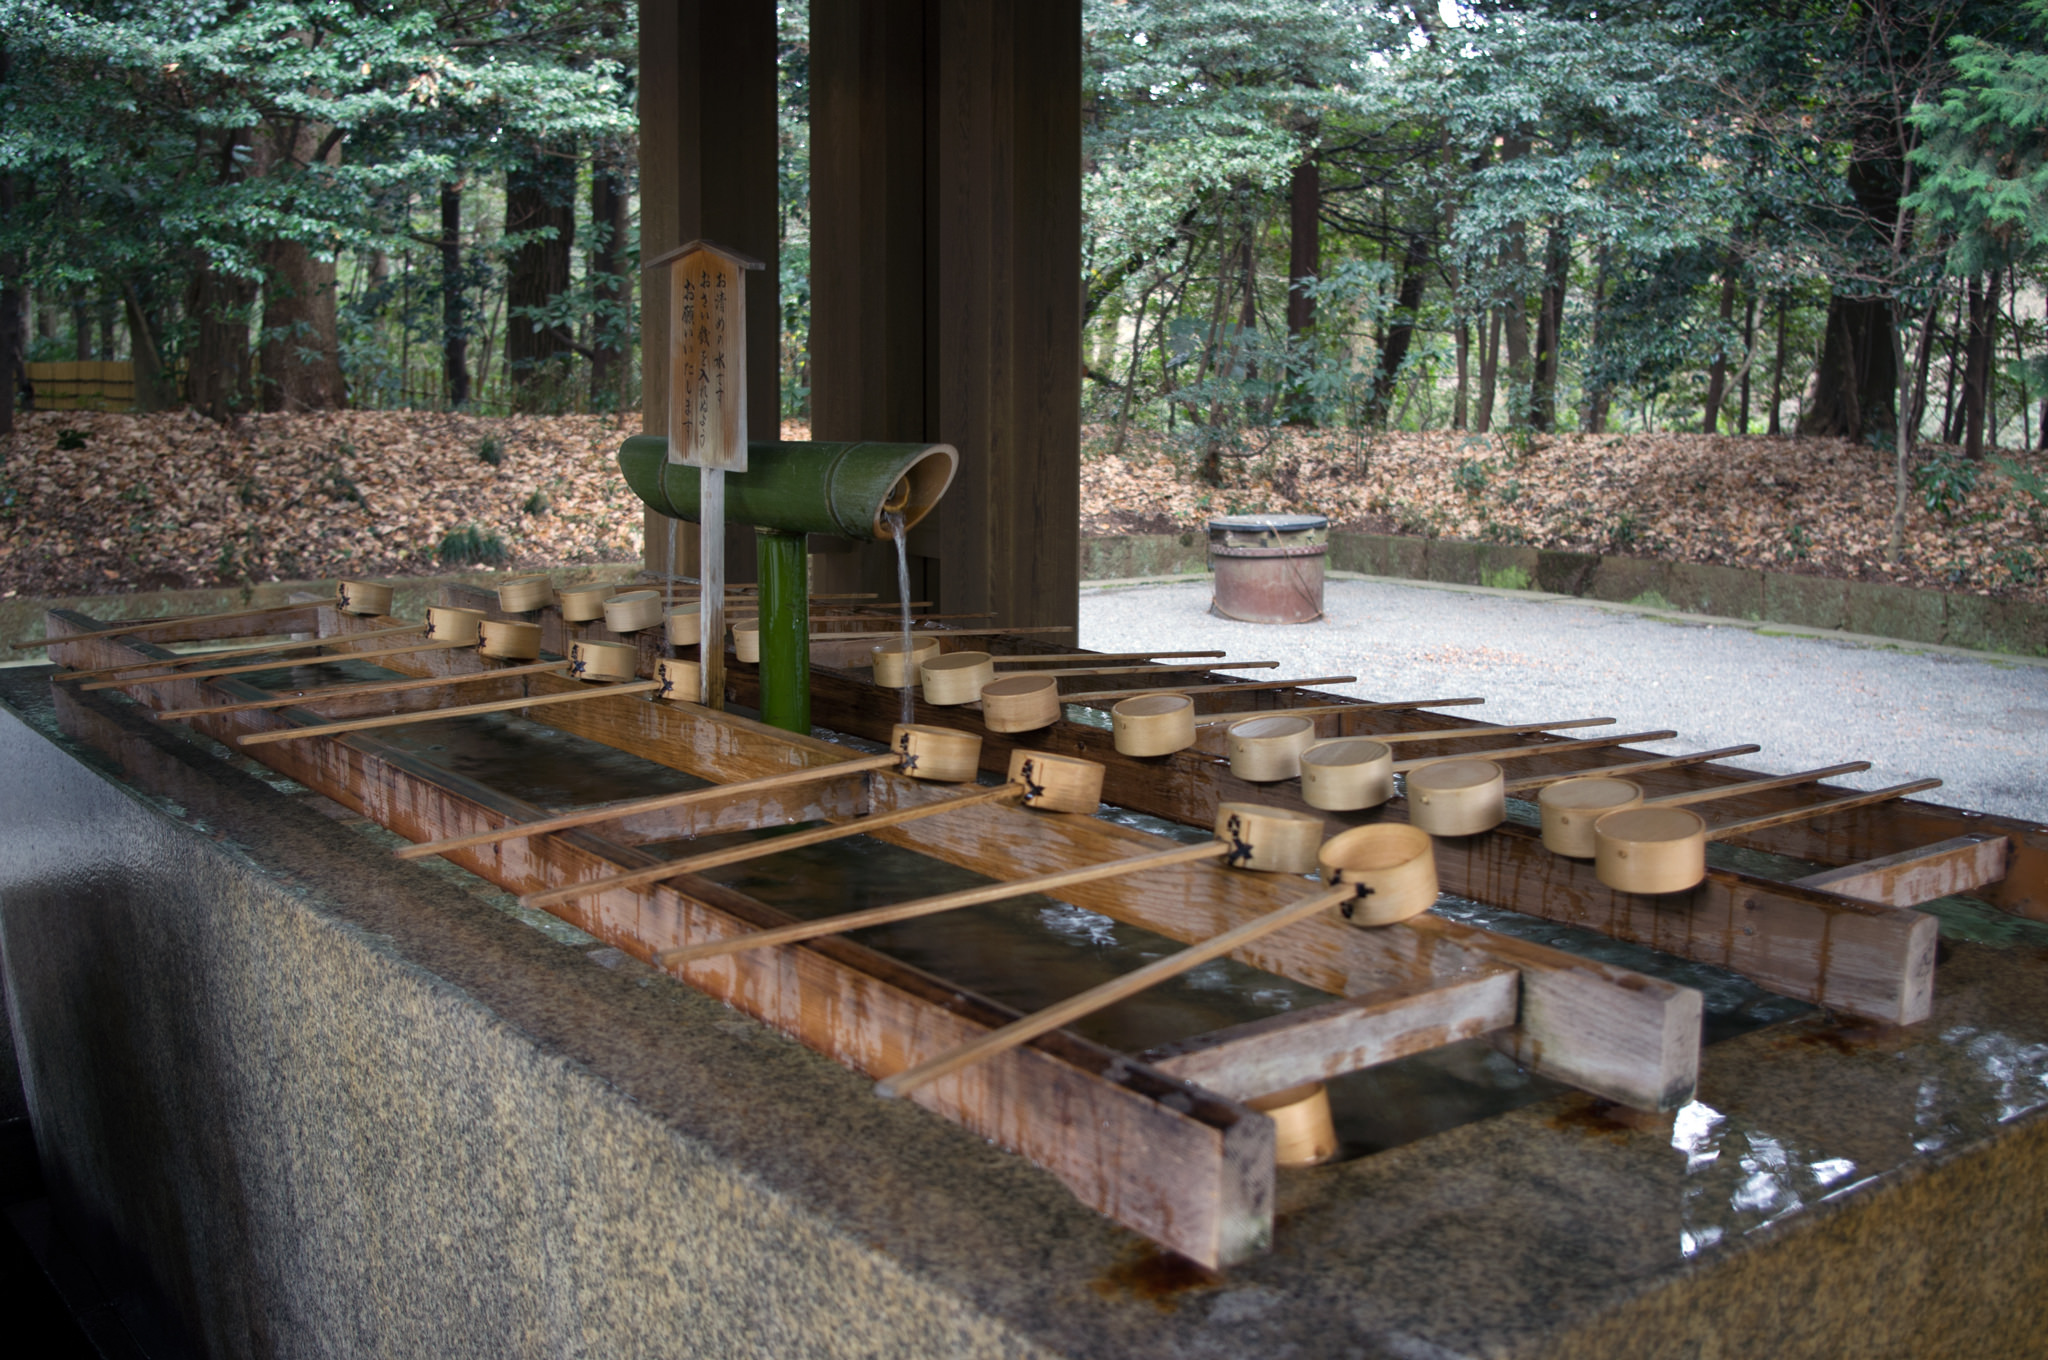 Okiome cleansing station at the Meiji Shrine in Tokyo